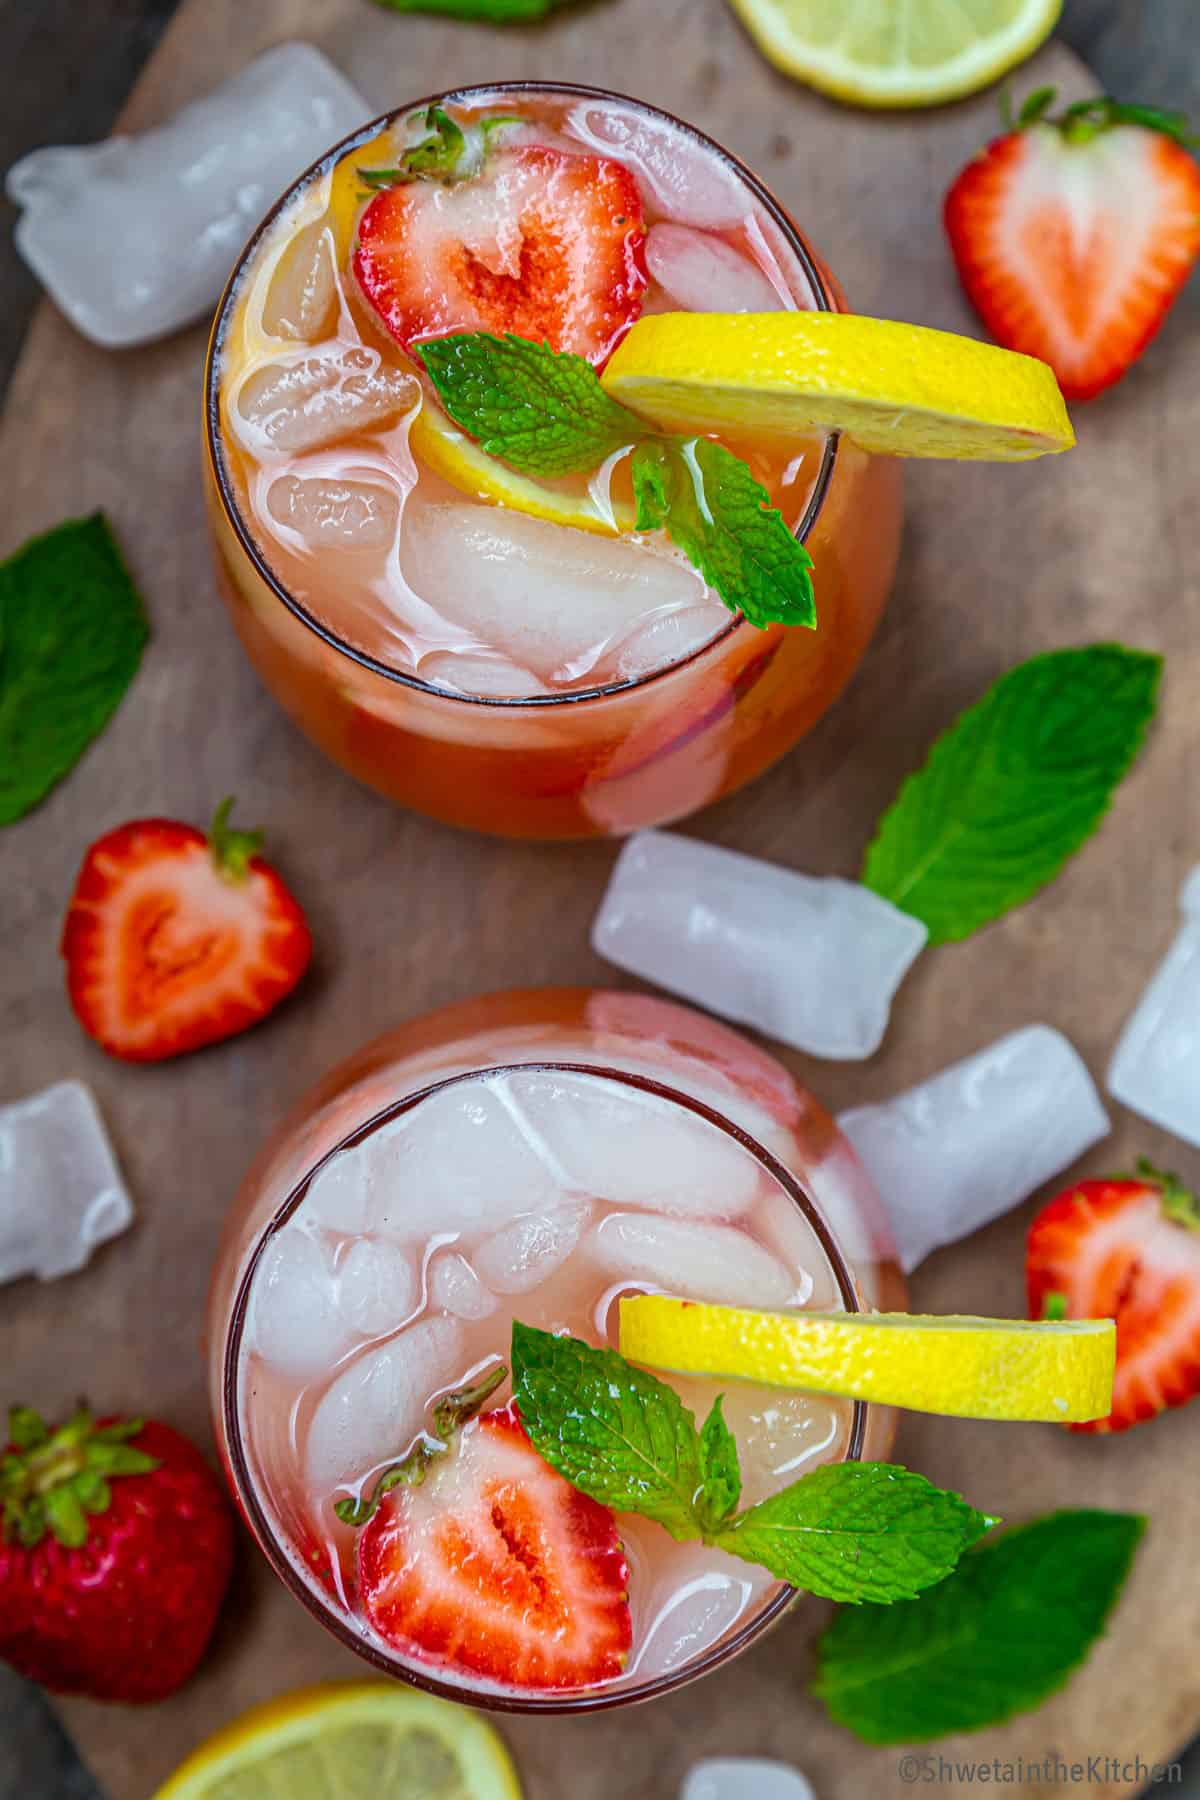 Top view of two strawberry lemonade glasses garnished with lemon slices, strawberry and mint